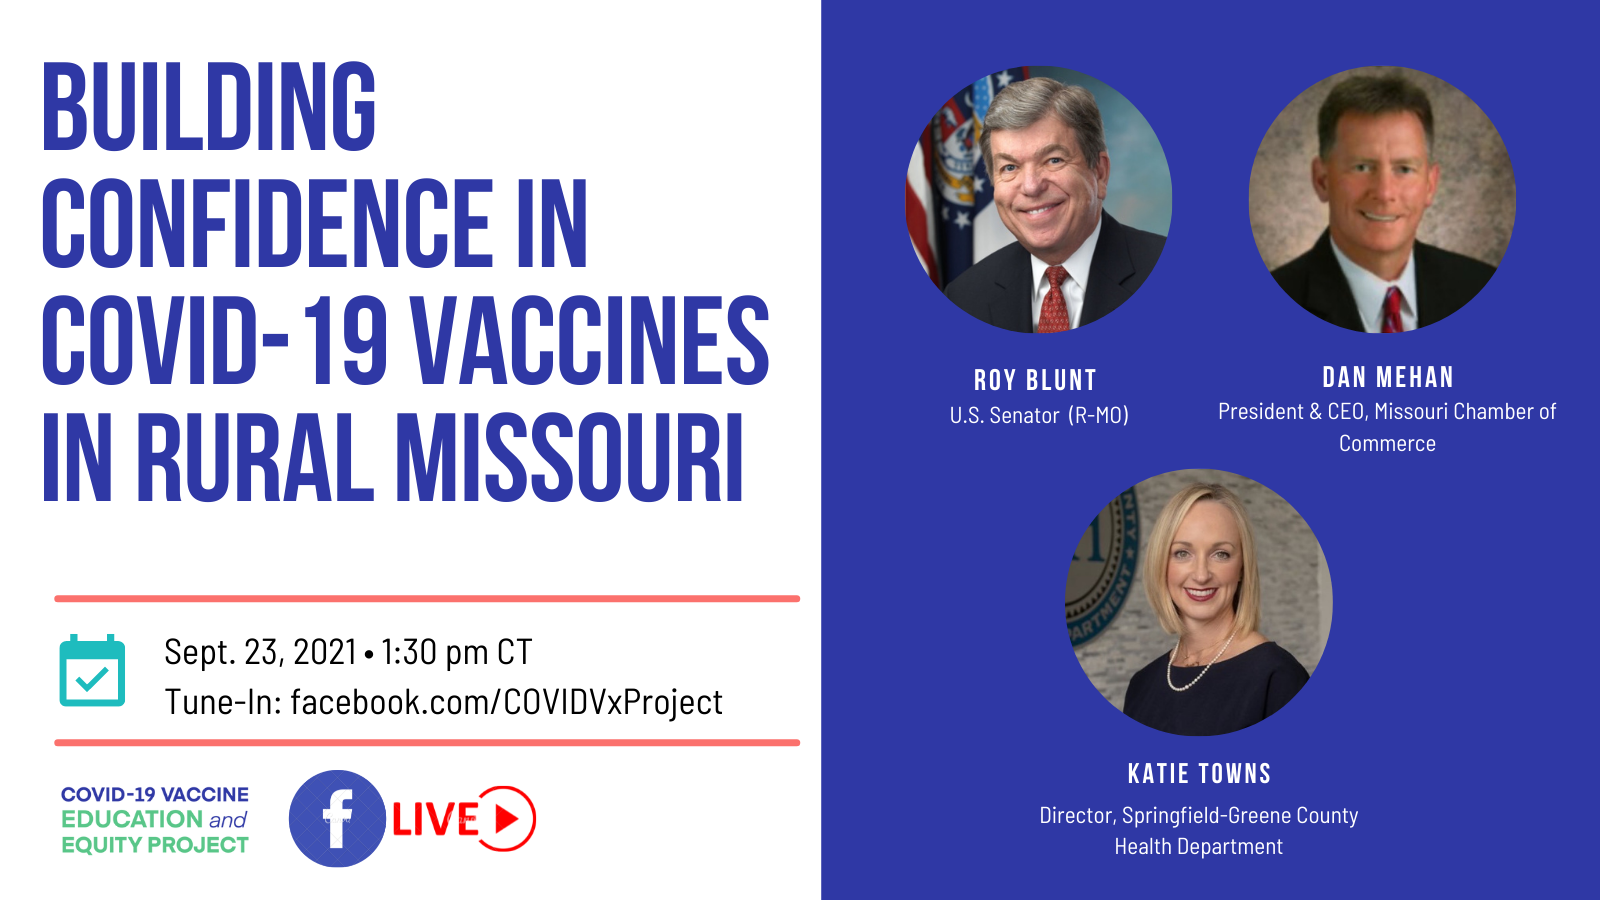 Building Confidence in COVID-19 Vaccines in Southwest Missouri